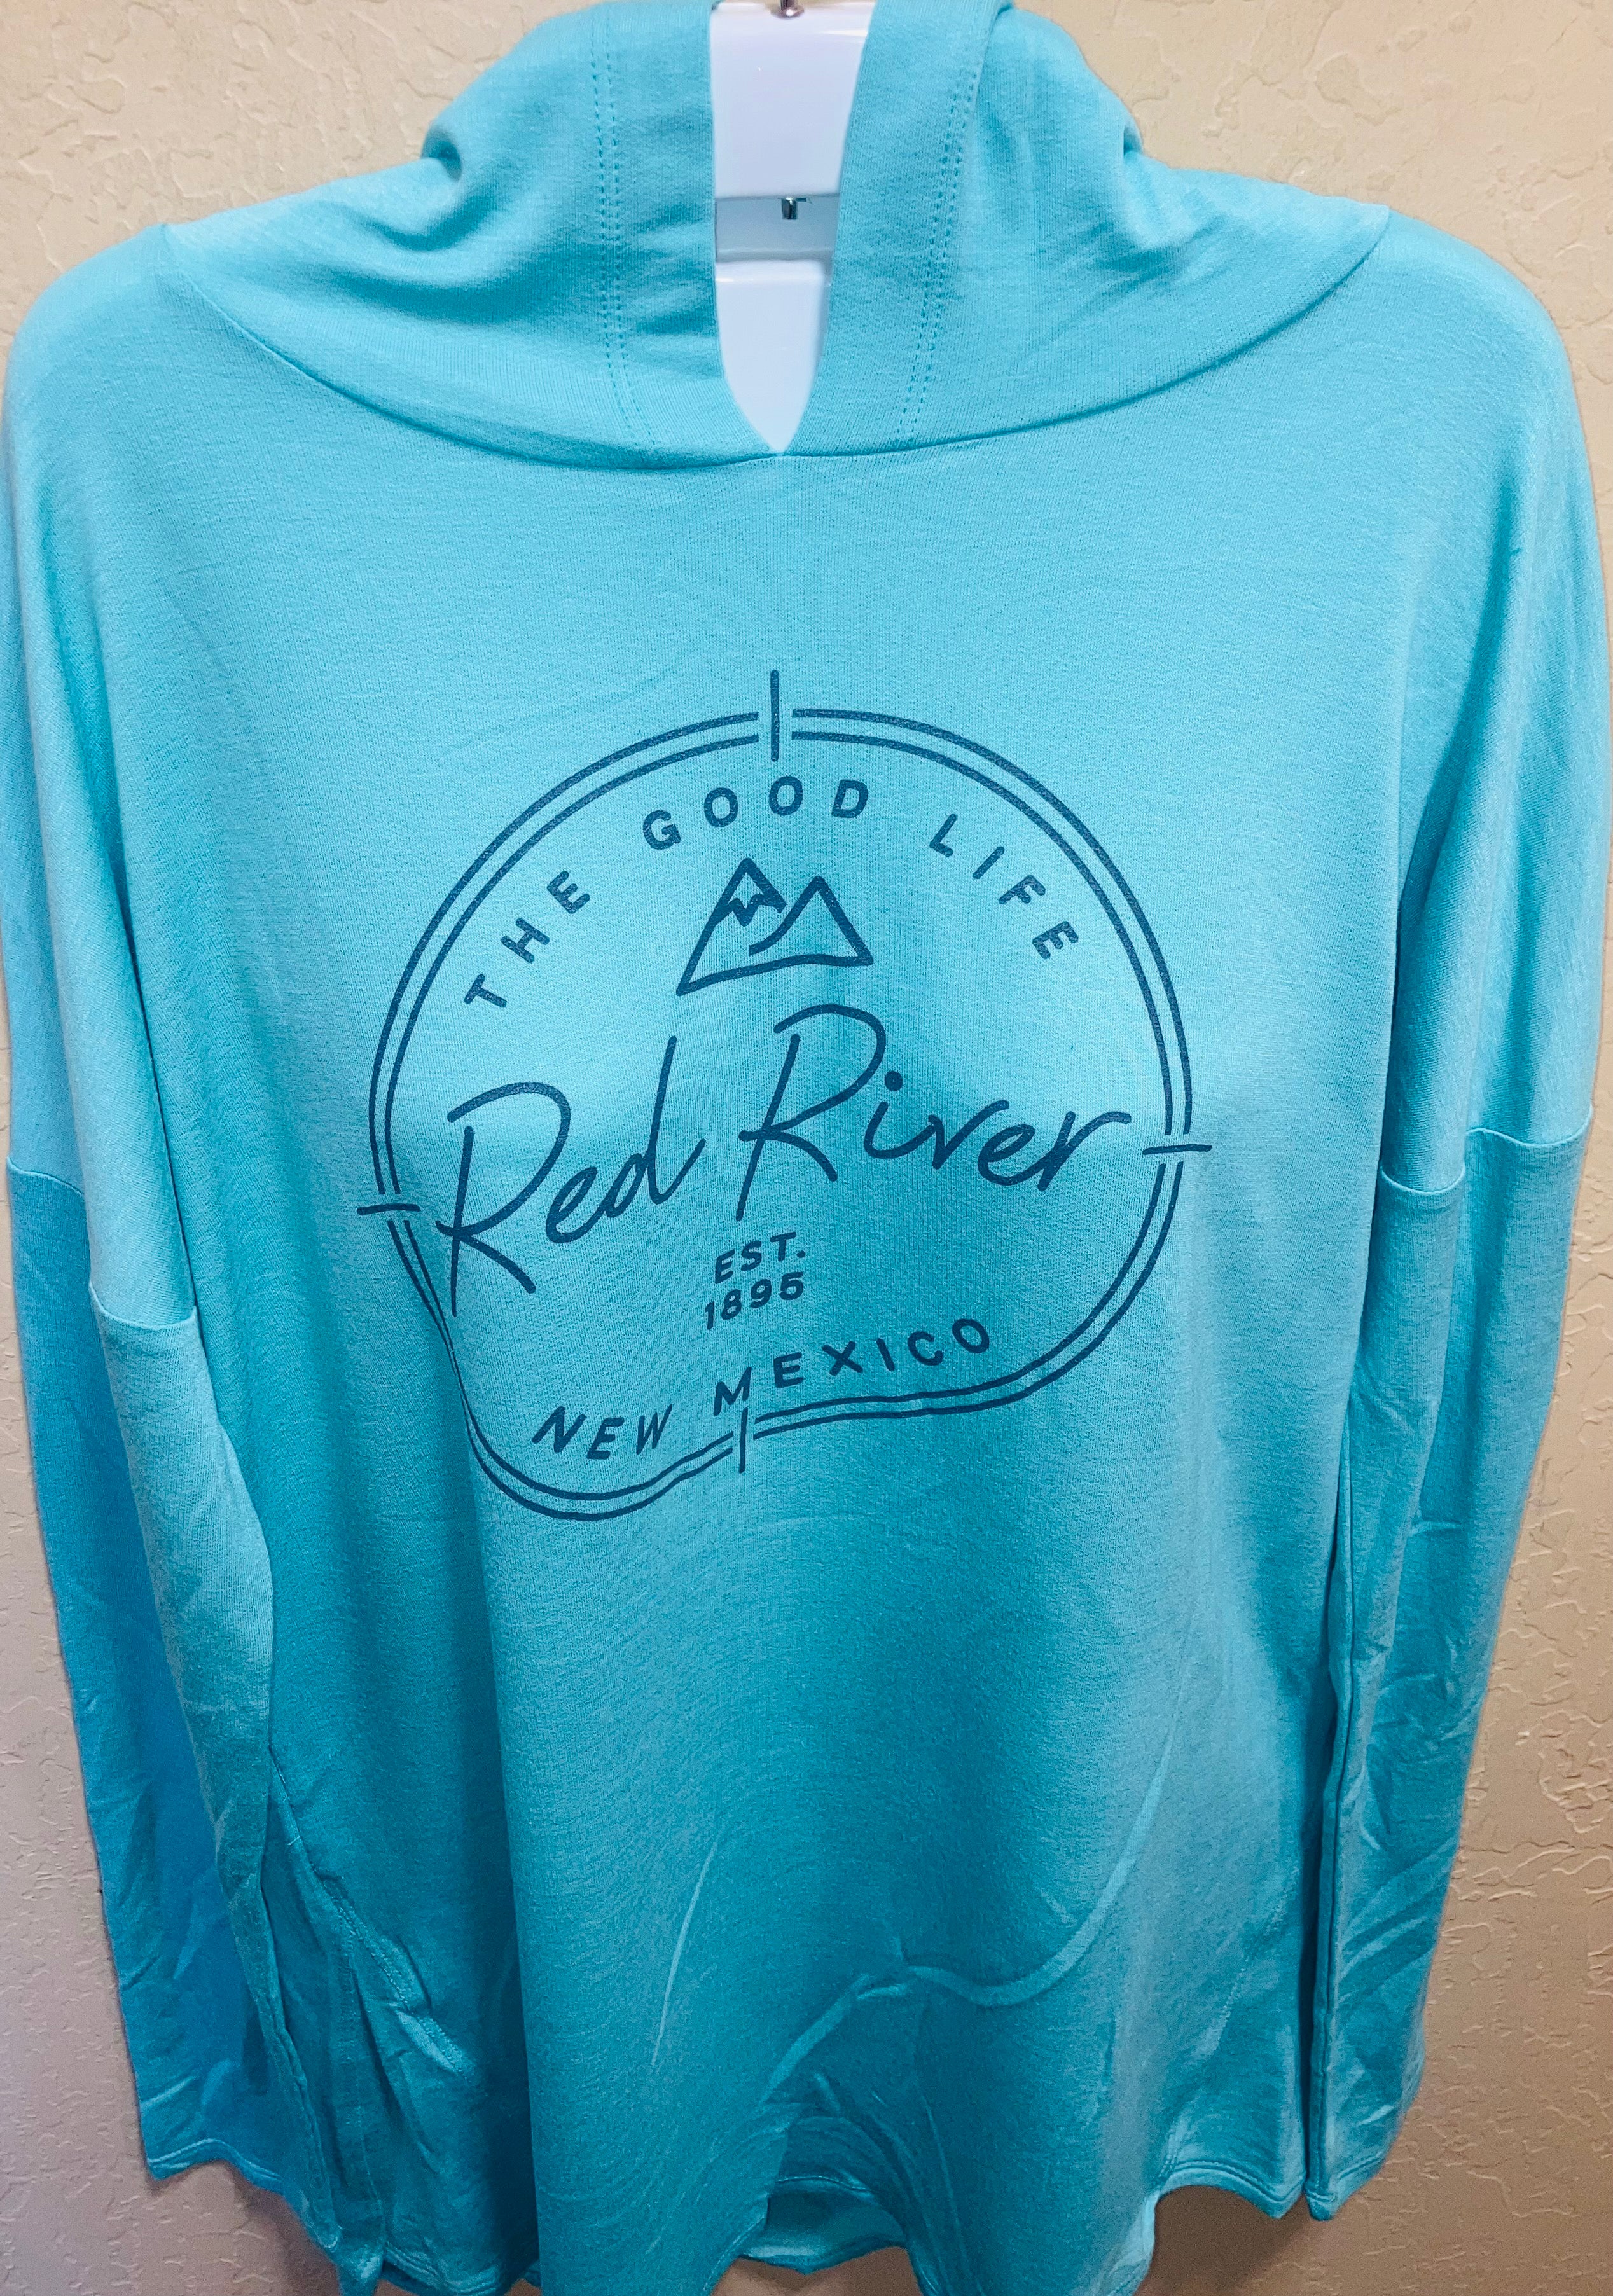 Soft Red River Hooded Tee